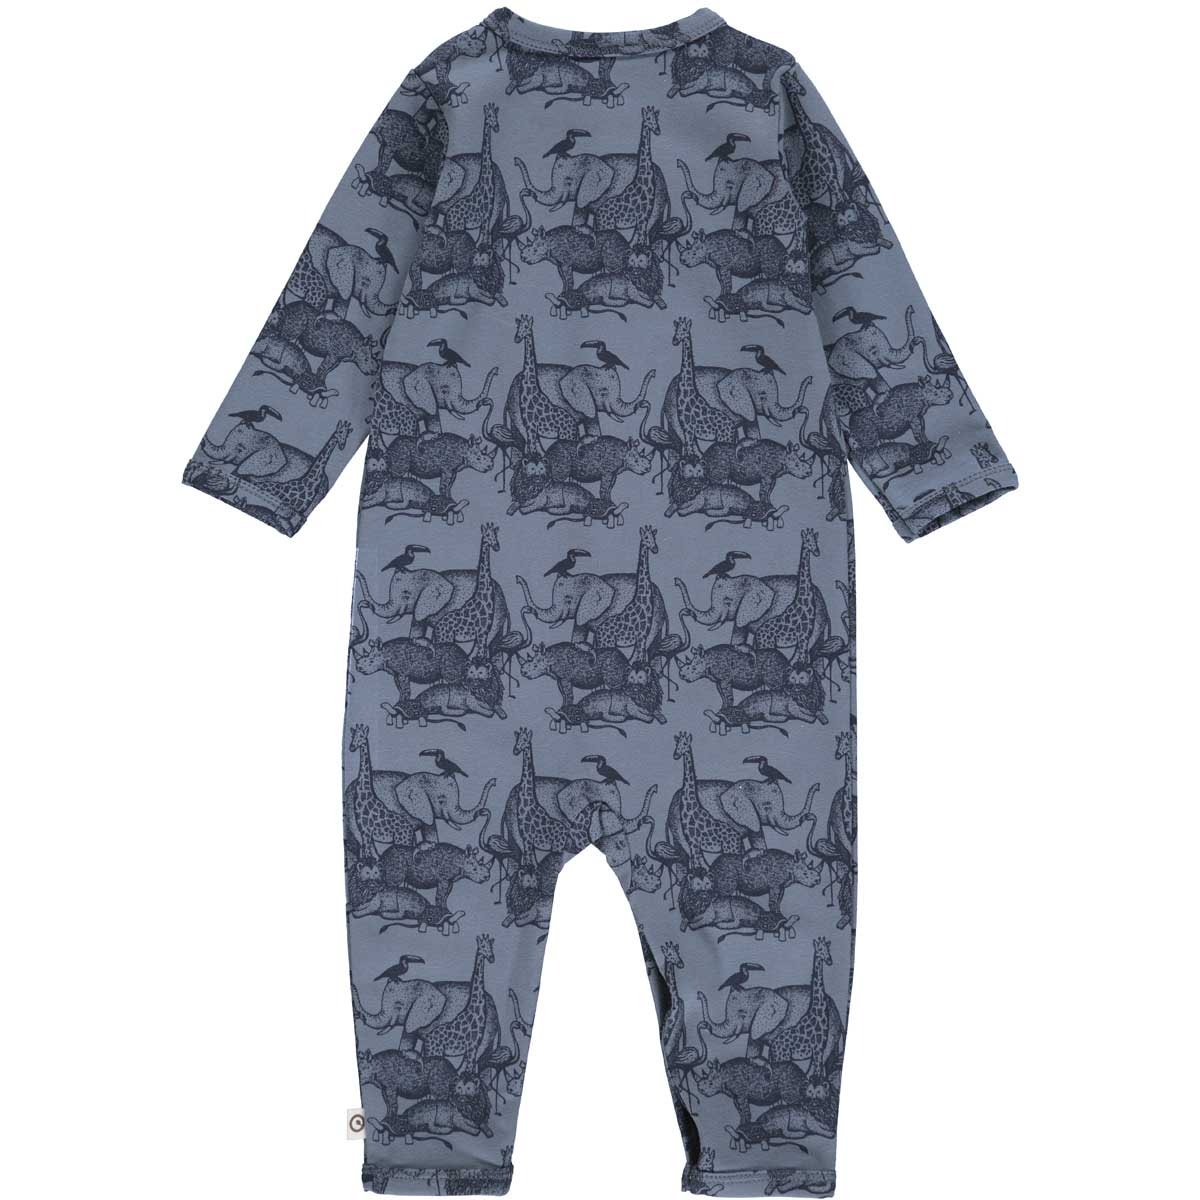 MAMA.LICIOUS Baby one-piece suit -Dusty Blue - 1584057200